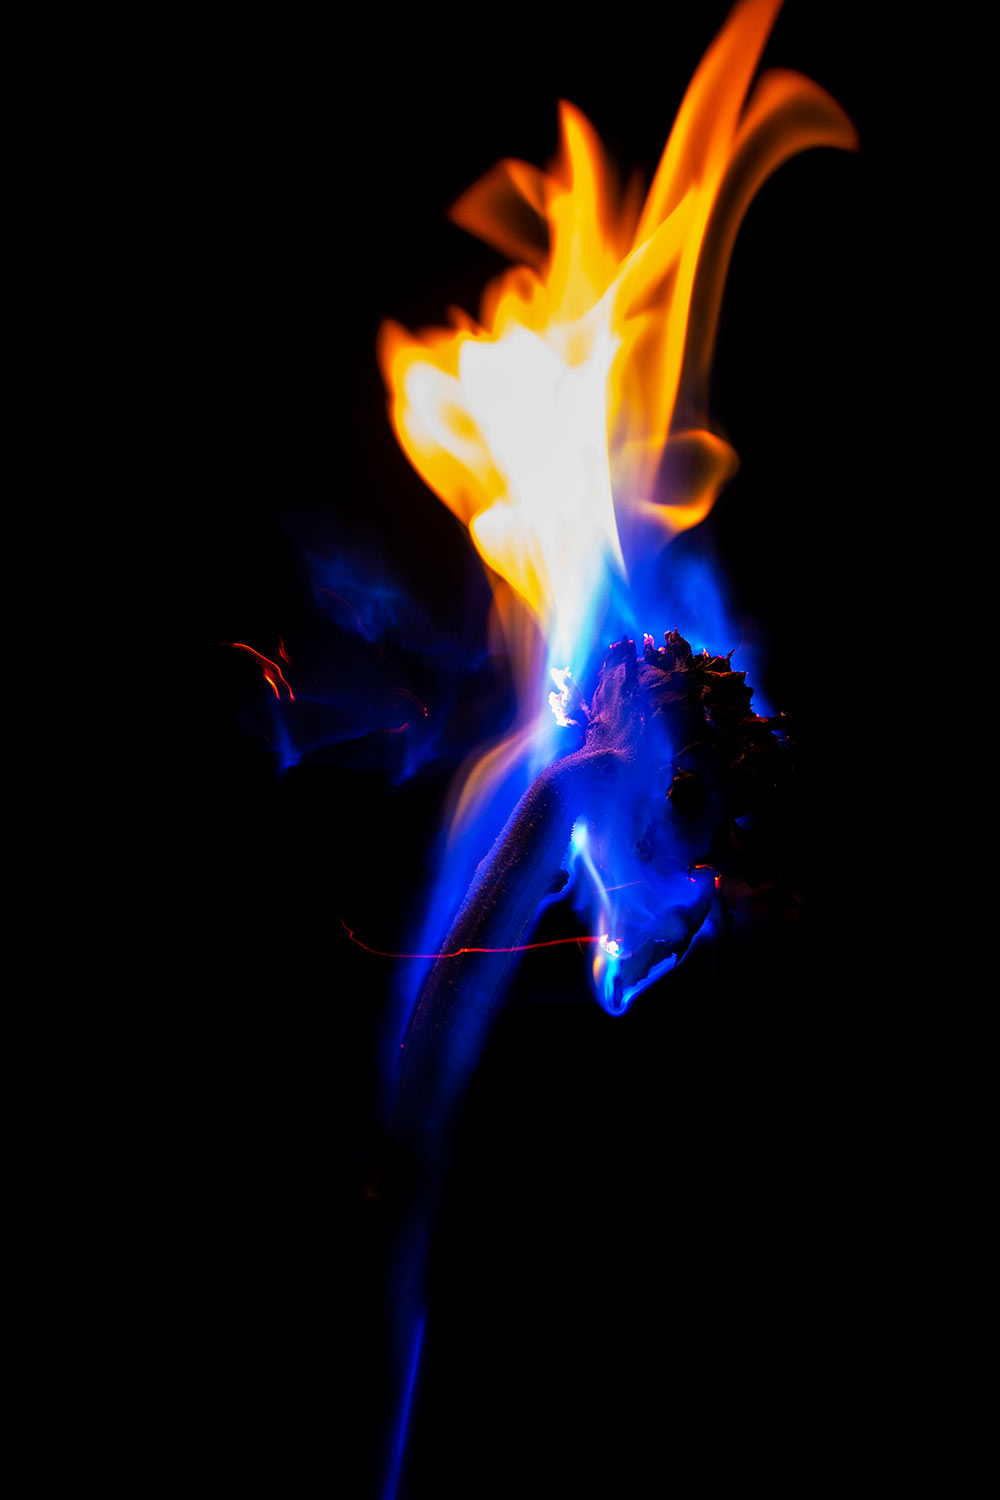 flower on fire - yellow and blue flames